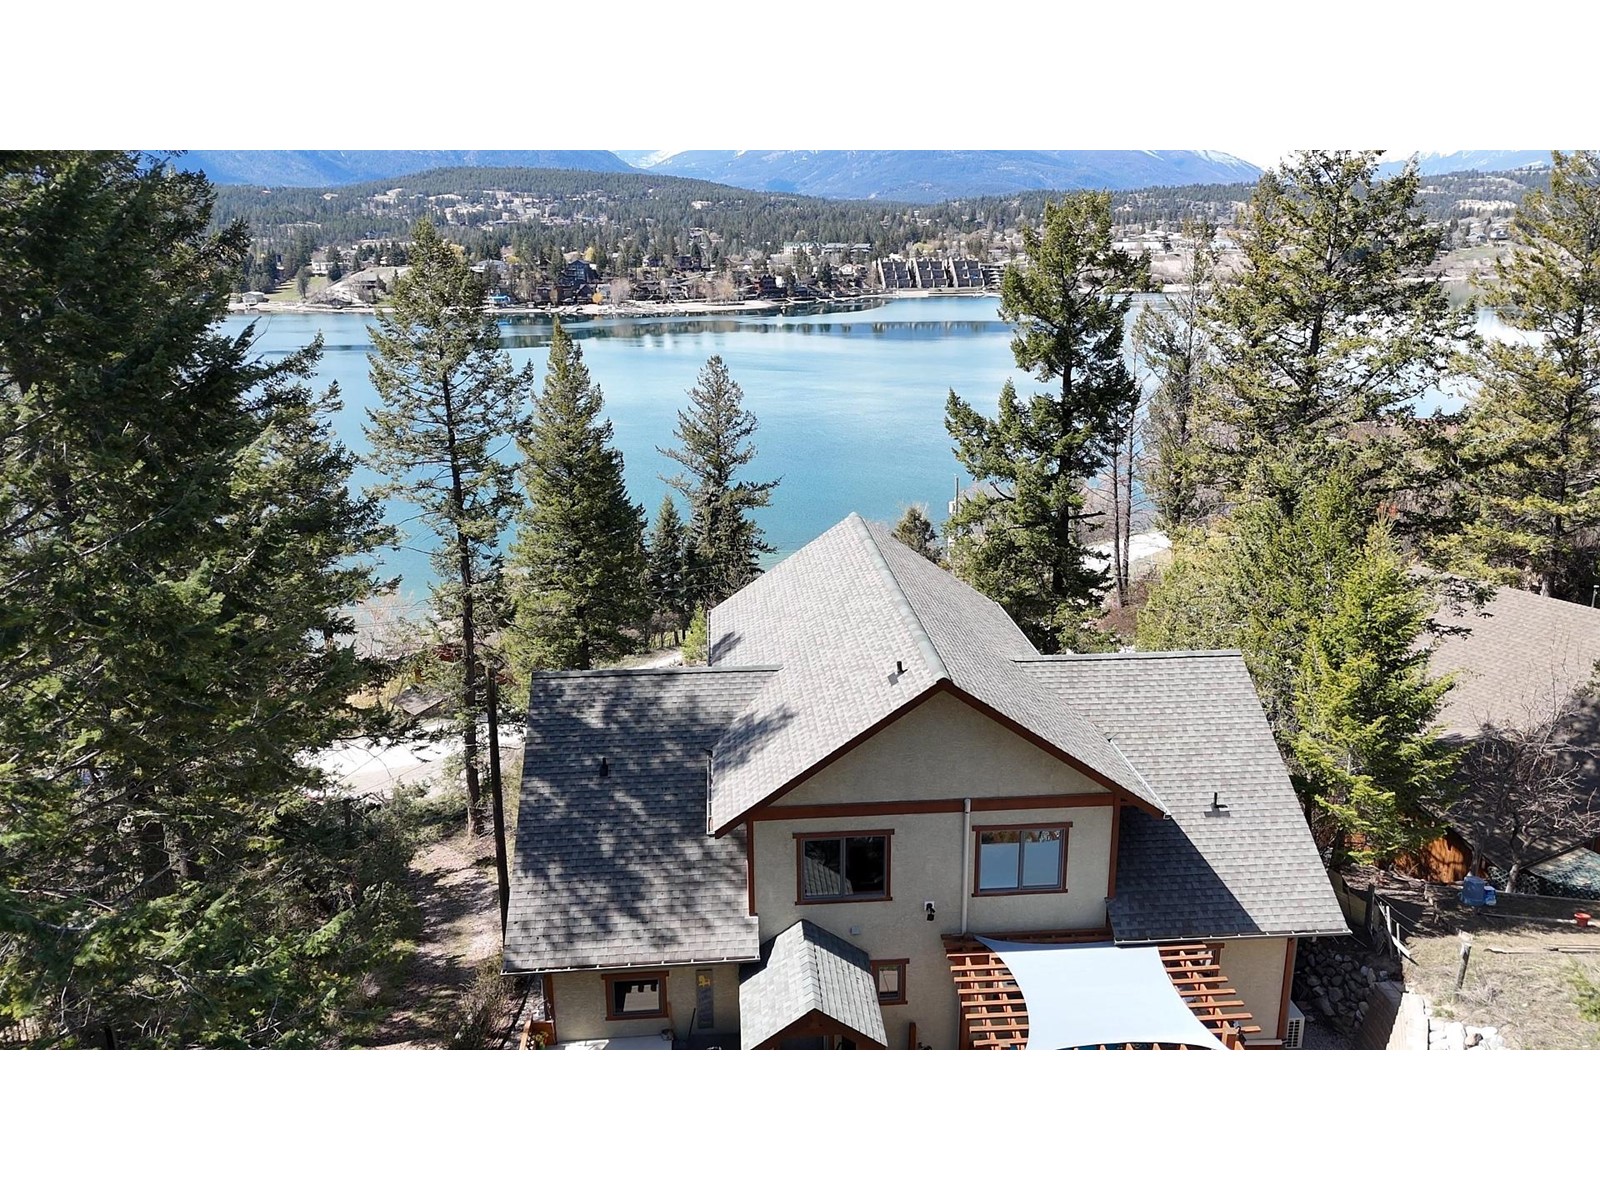 788 LAKEVIEW ROAD, invermere, British Columbia